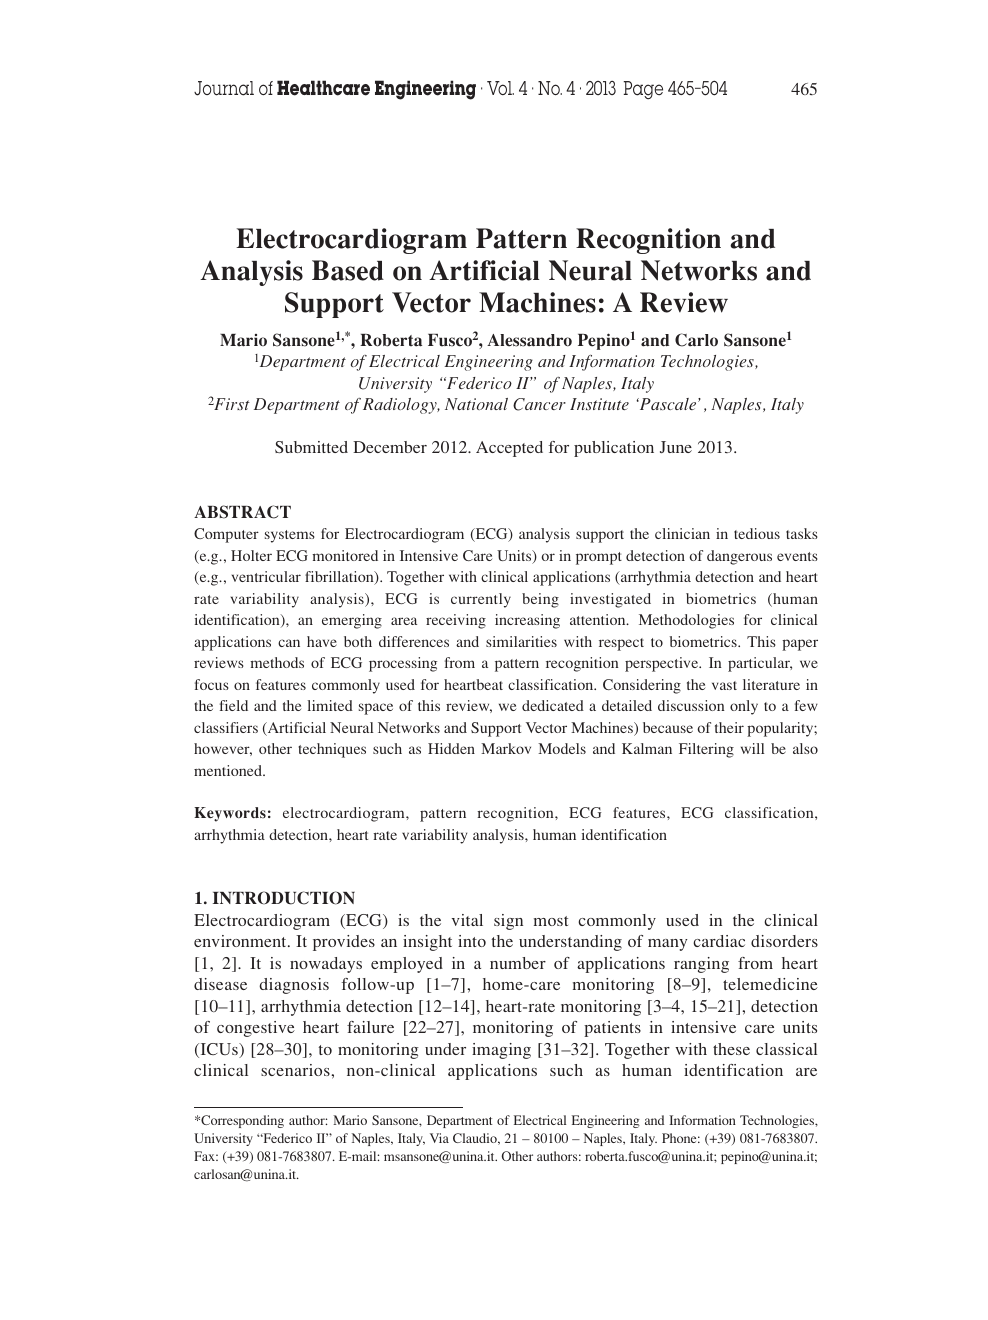 Electrocardiogram Pattern Recognition and Analysis Based on 